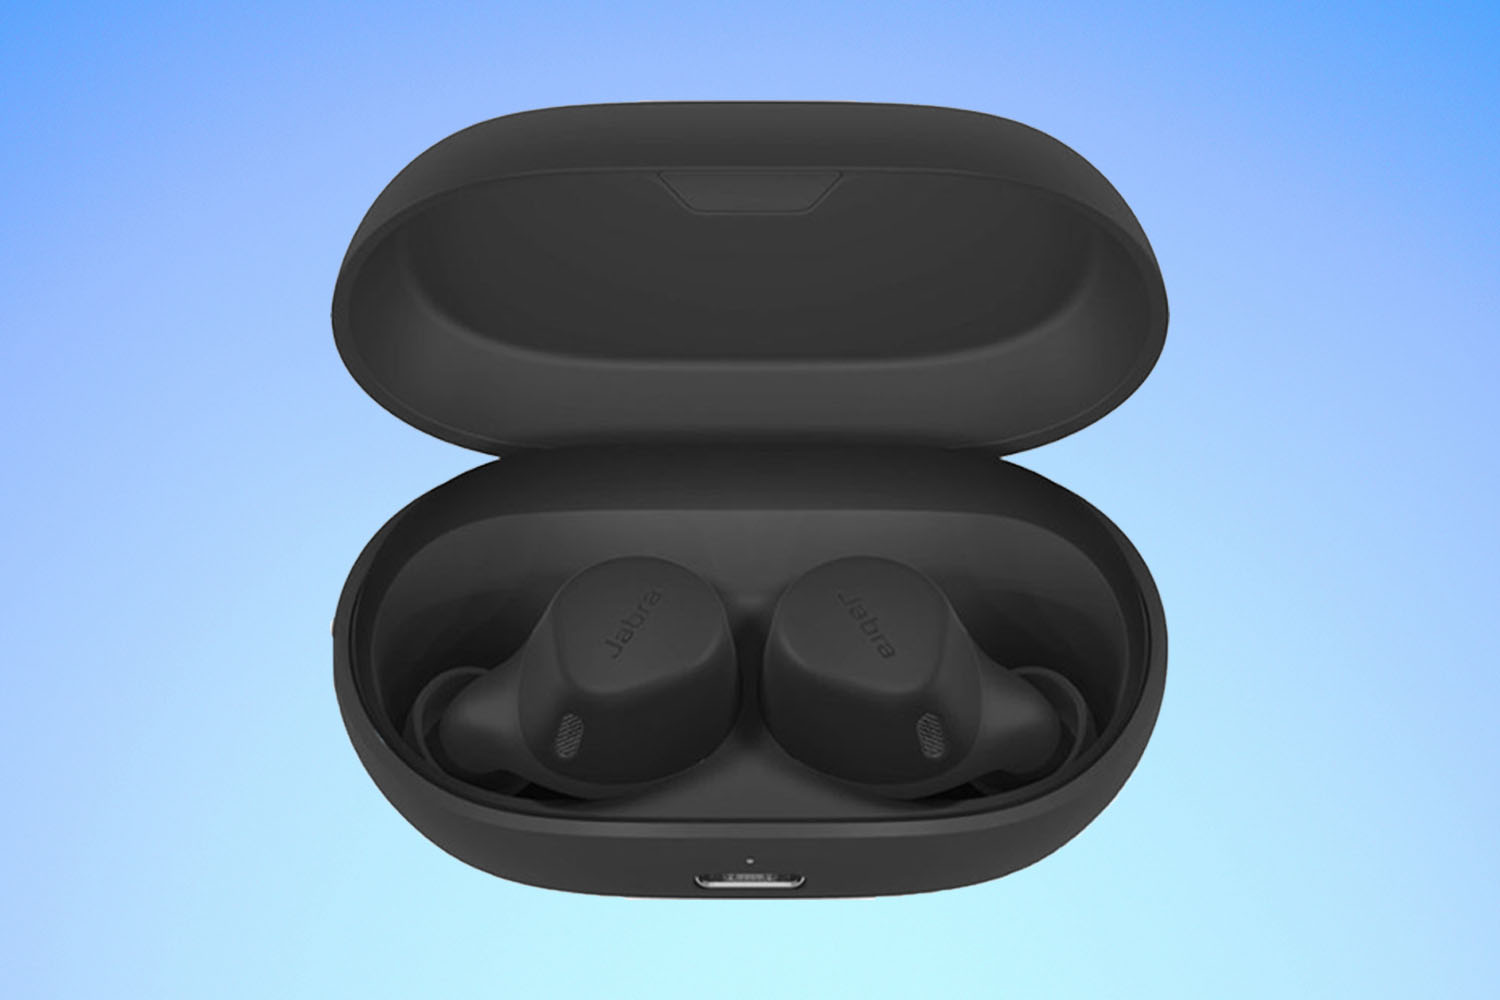 a pair of black headphones in a case from Jabra on a blue gradient background